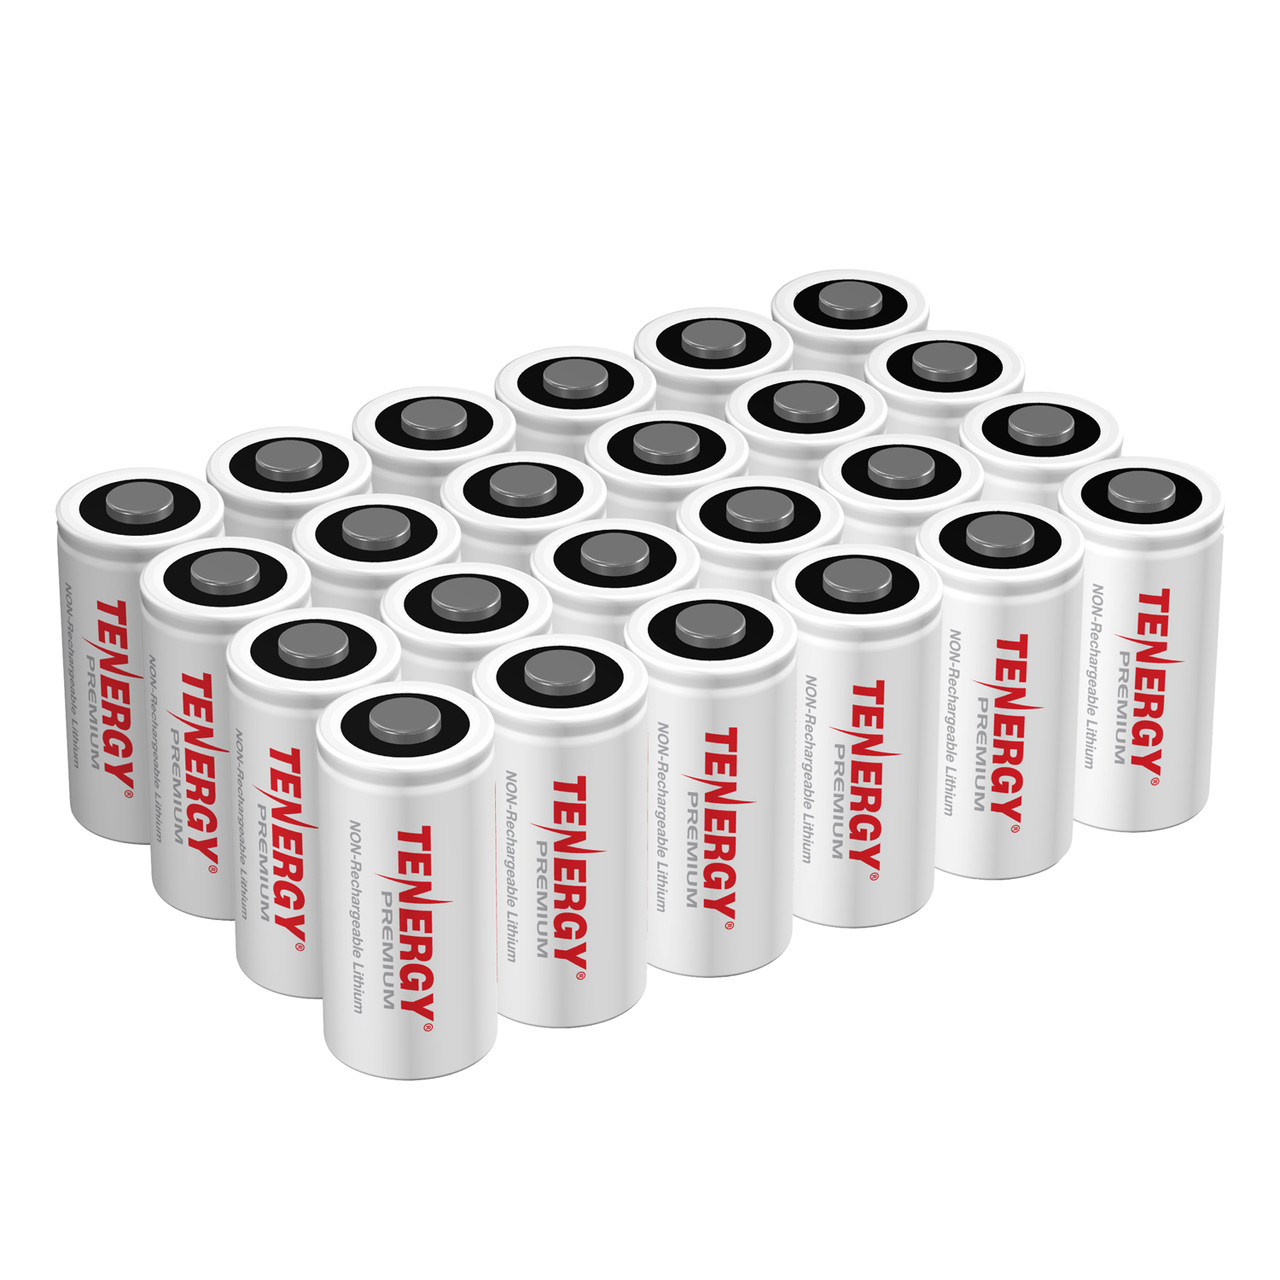 24-pack, Tenergy Premium CR123A 3V Lithium Battery PTC protected - [Non-Rechargeable]